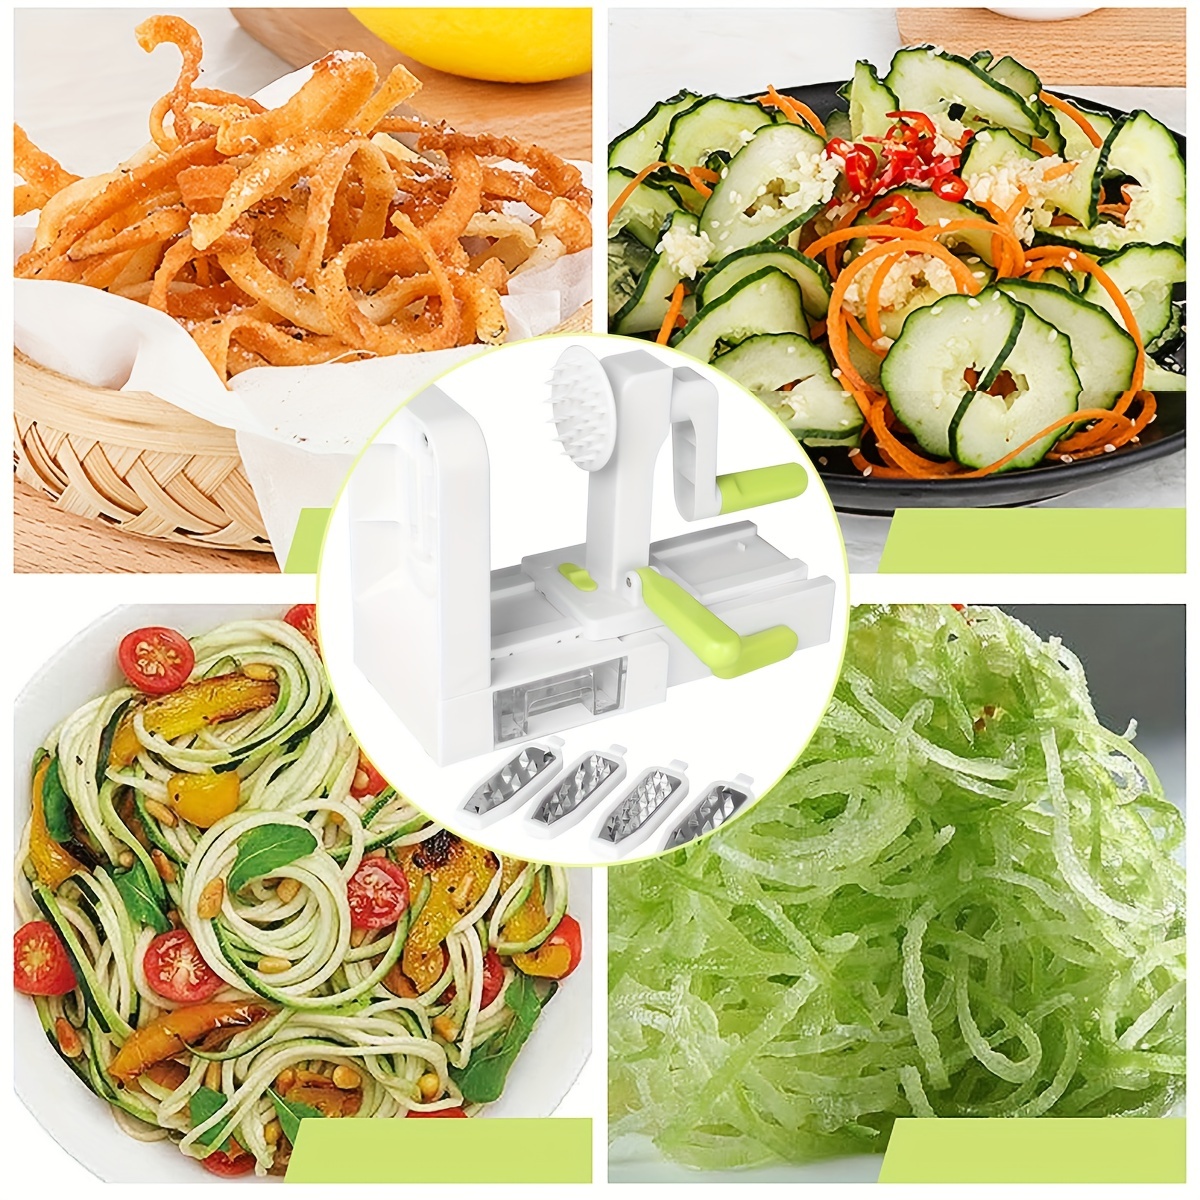 Spiralizer for Veggies, 4 in 1 Zoodles Spiralizer, Zucchini Noodle